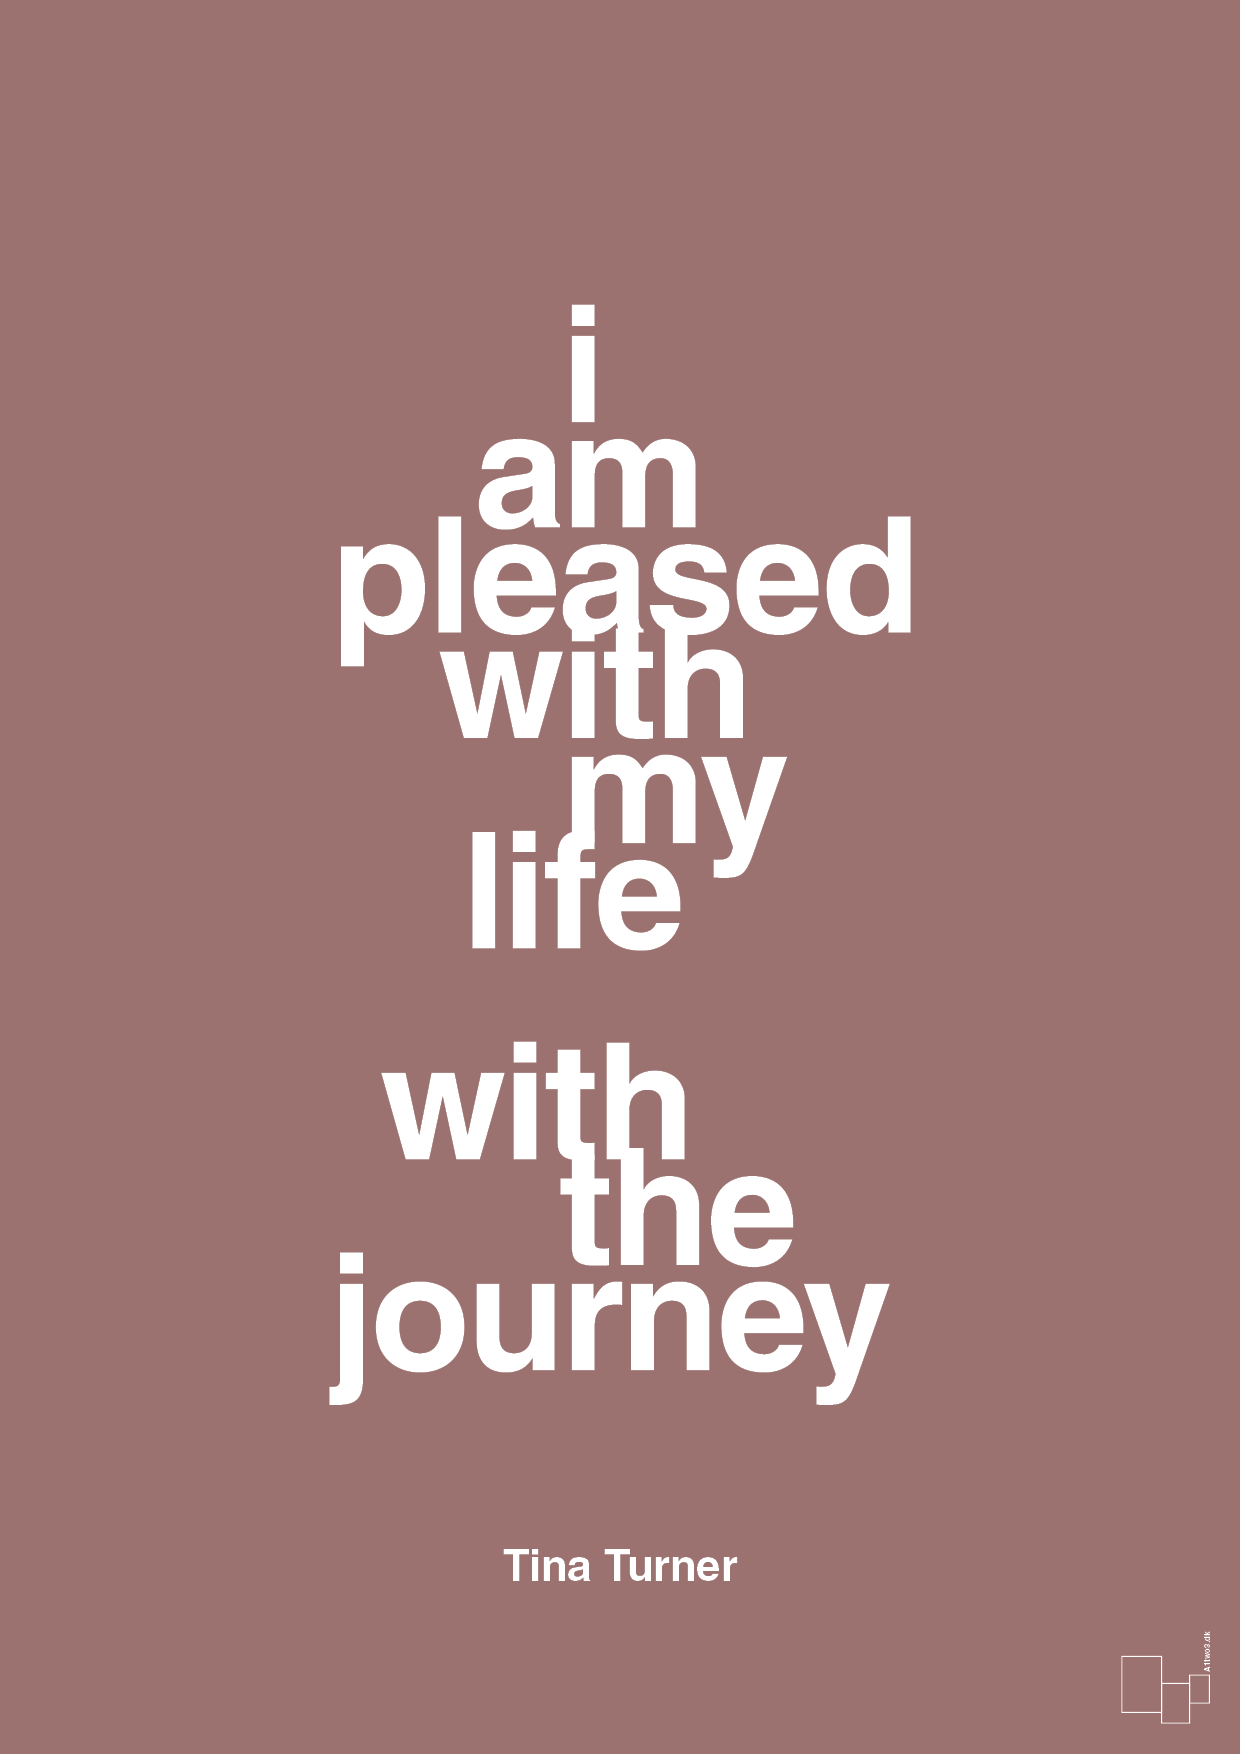 i am pleased with my life with the journey - Plakat med Citater i Plum